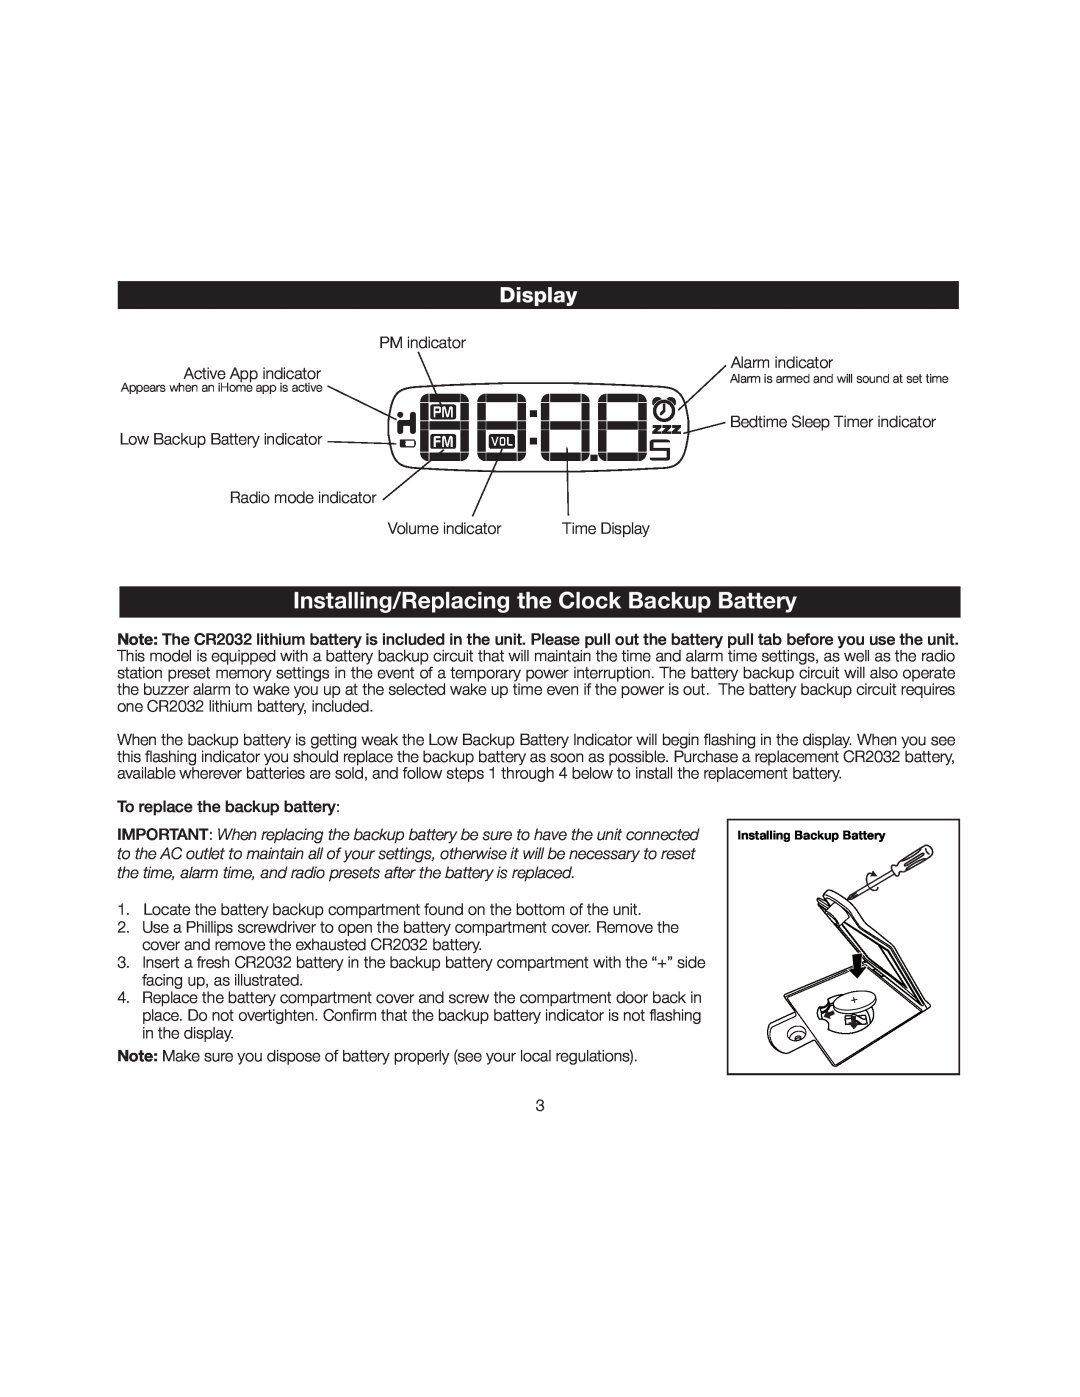 iHome iA17 instruction manual Display, Installing/Replacing the Clock Backup Battery 